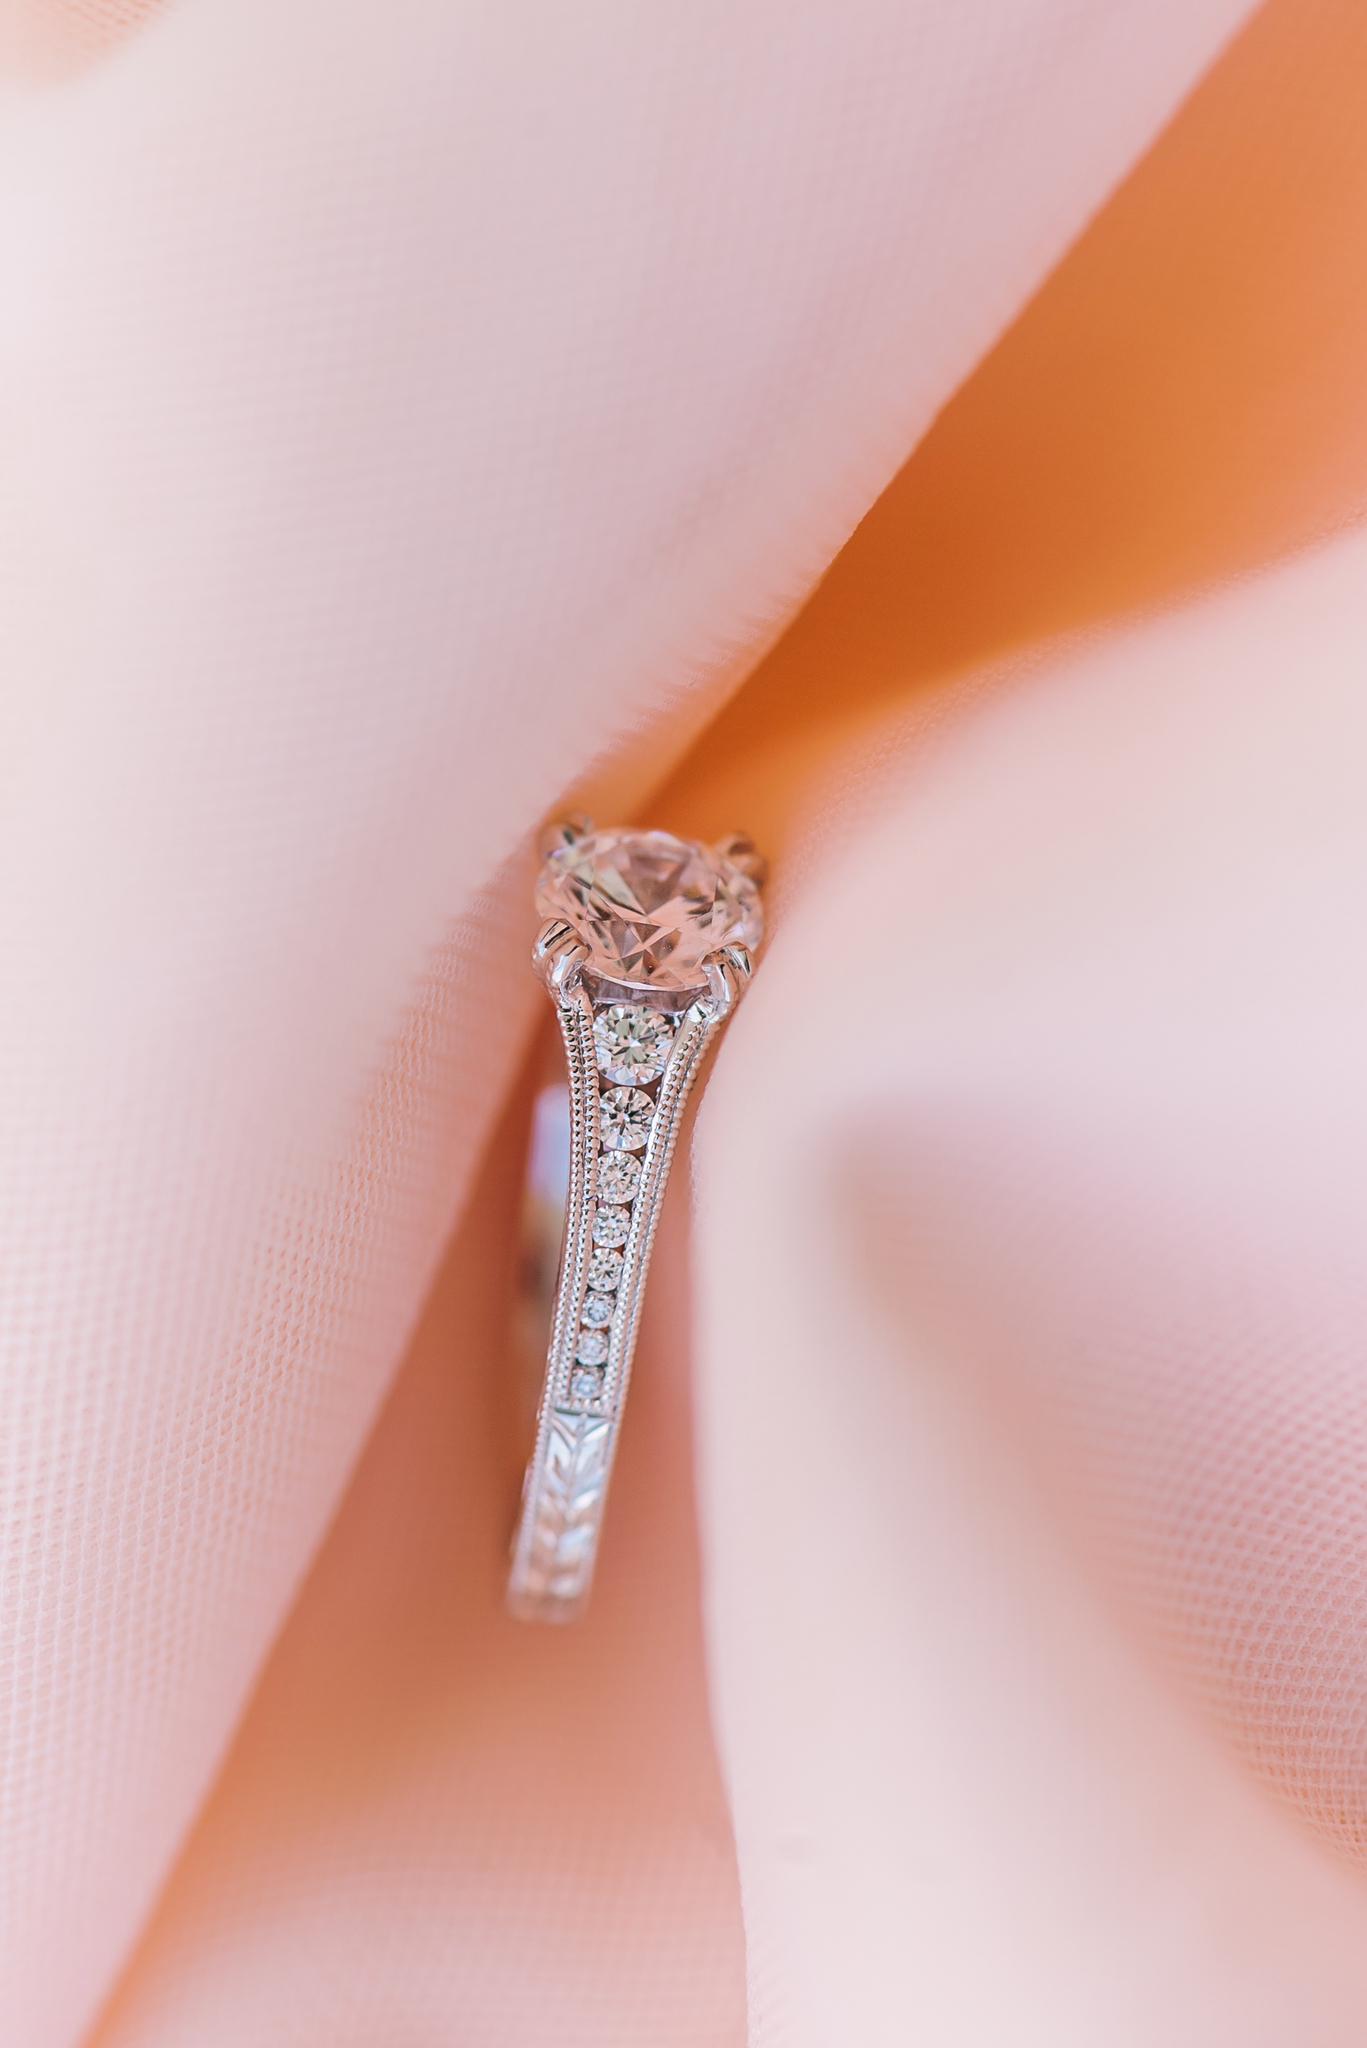 White gold and diamond engagement ring on a soft pink fabric background